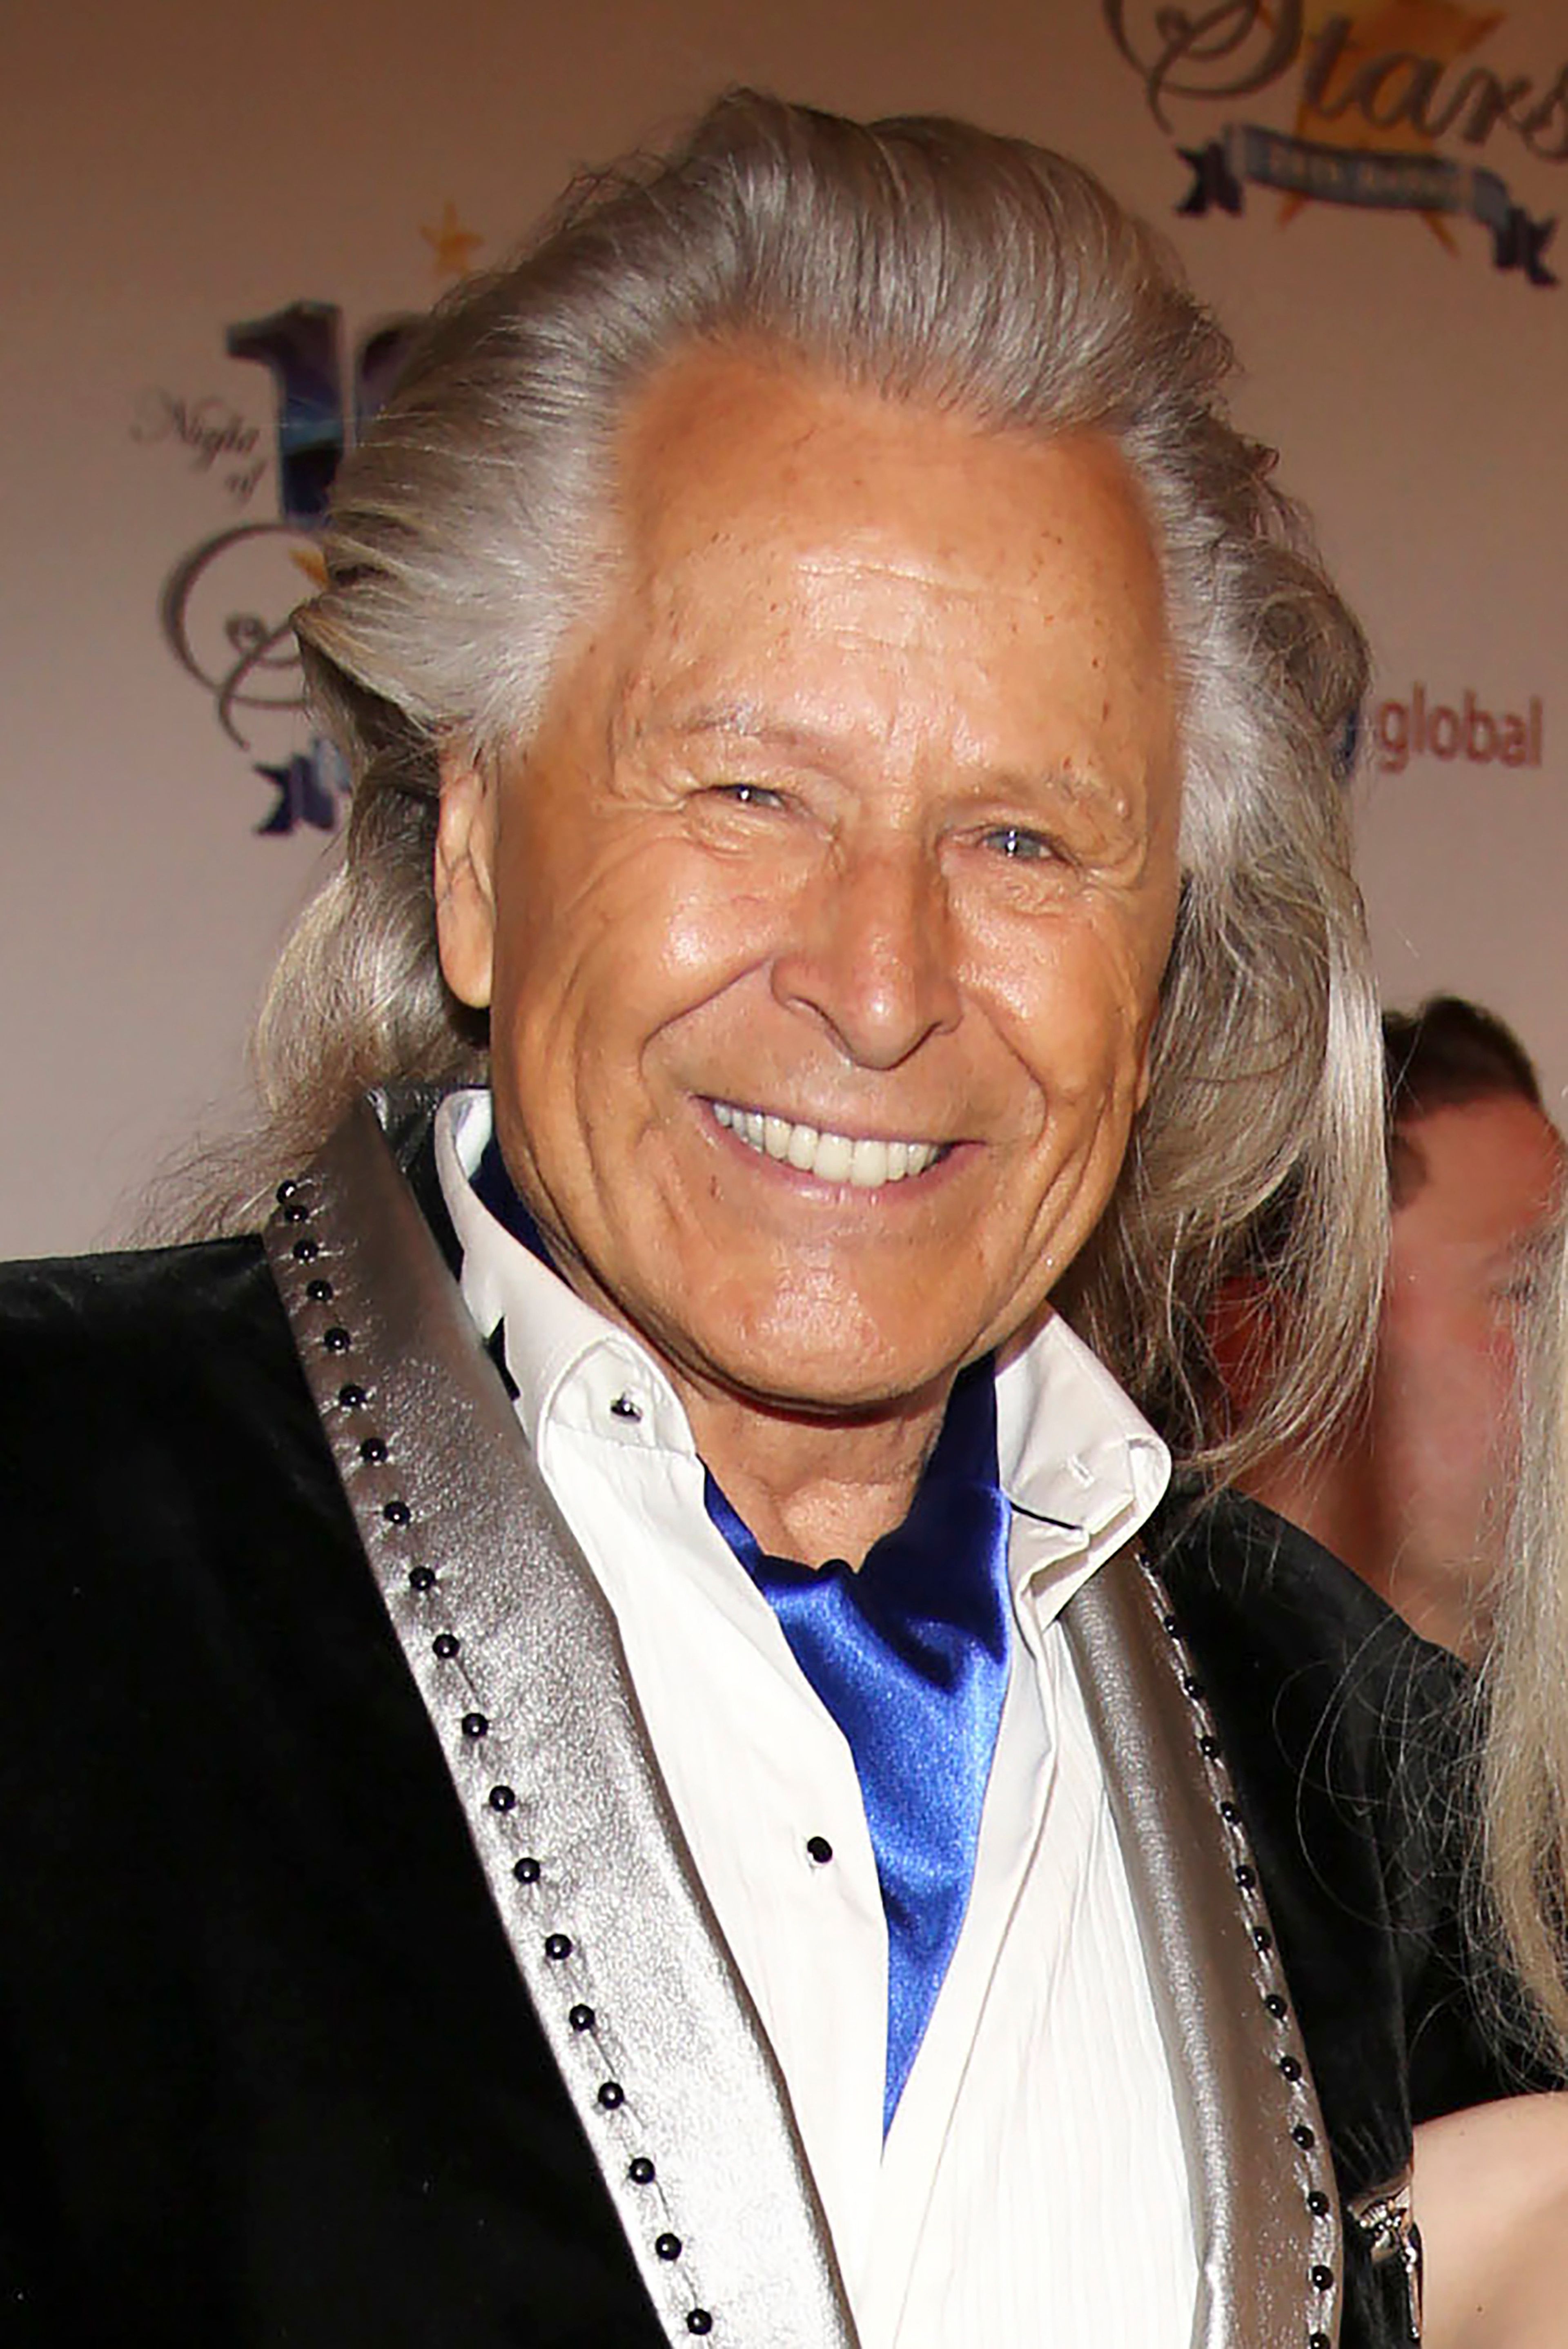 Fashion mogul Peter Nygard arrested in Canada on sex charges The Seattle Times image pic